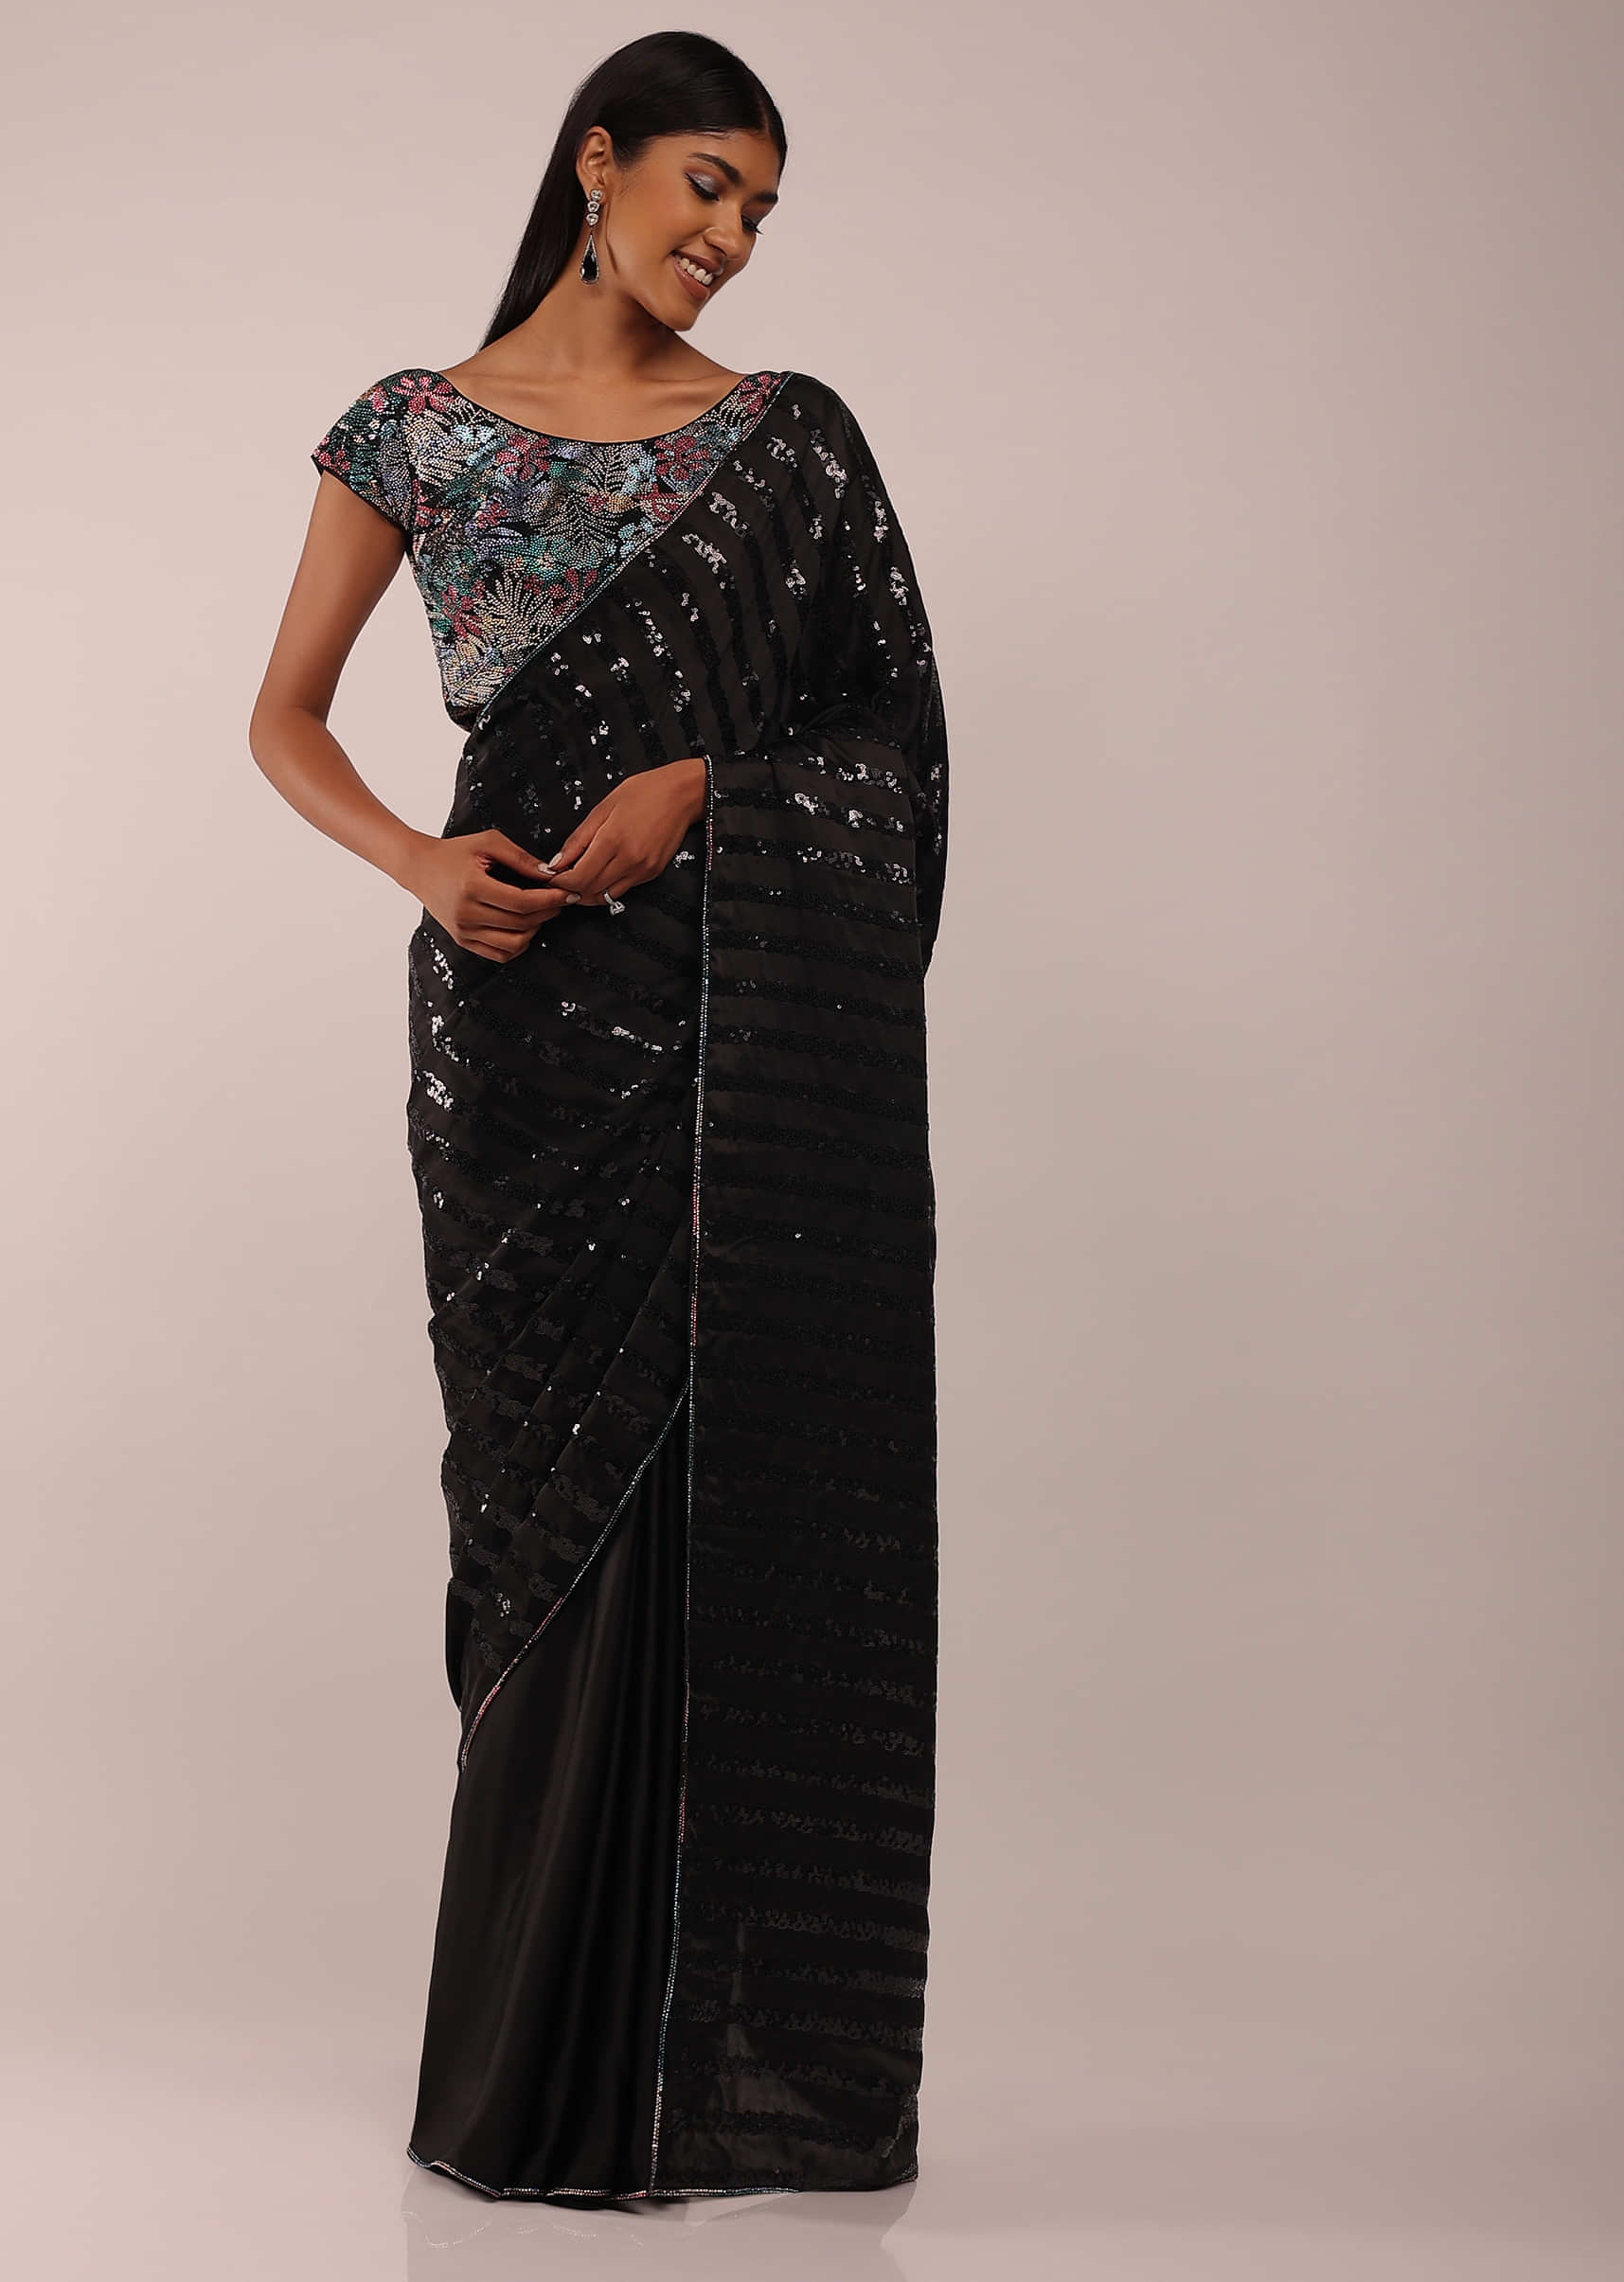 Pitch Black Satin Saree In Sequins Embroidery With Multi-Color Beads Embellishment On The Bottom Border